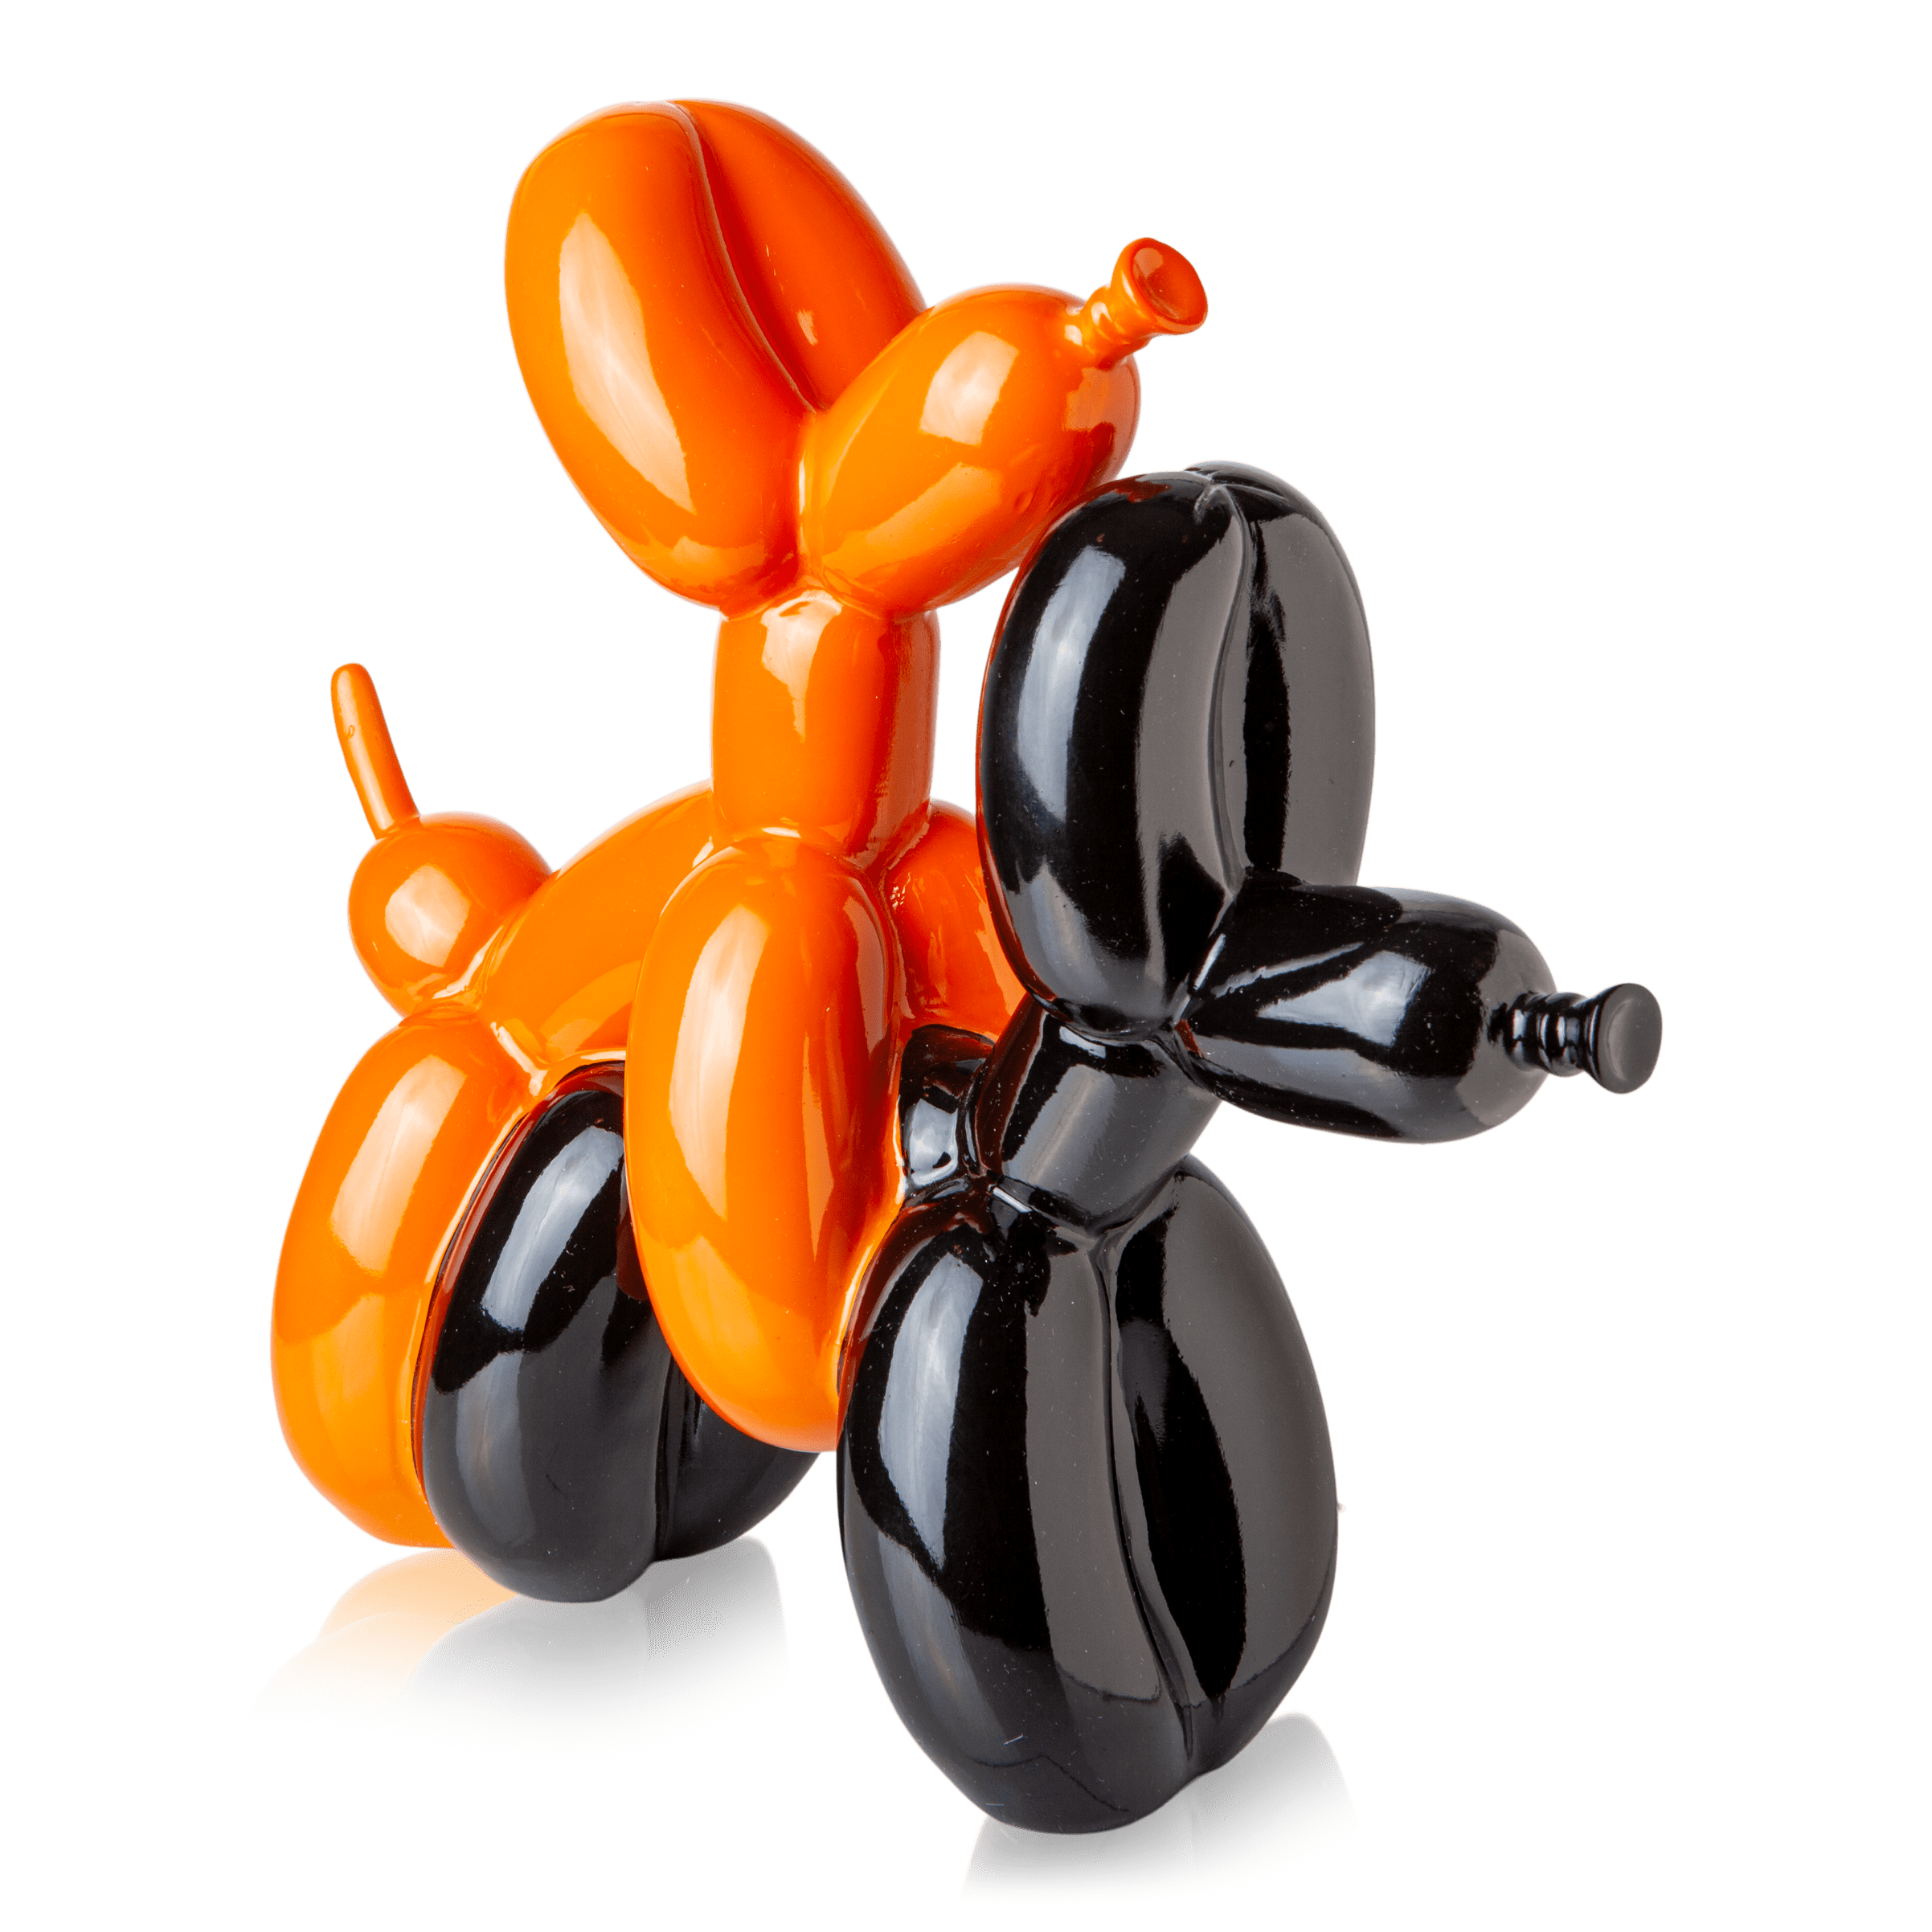 Getting Busy Balloon Dog Sculpture